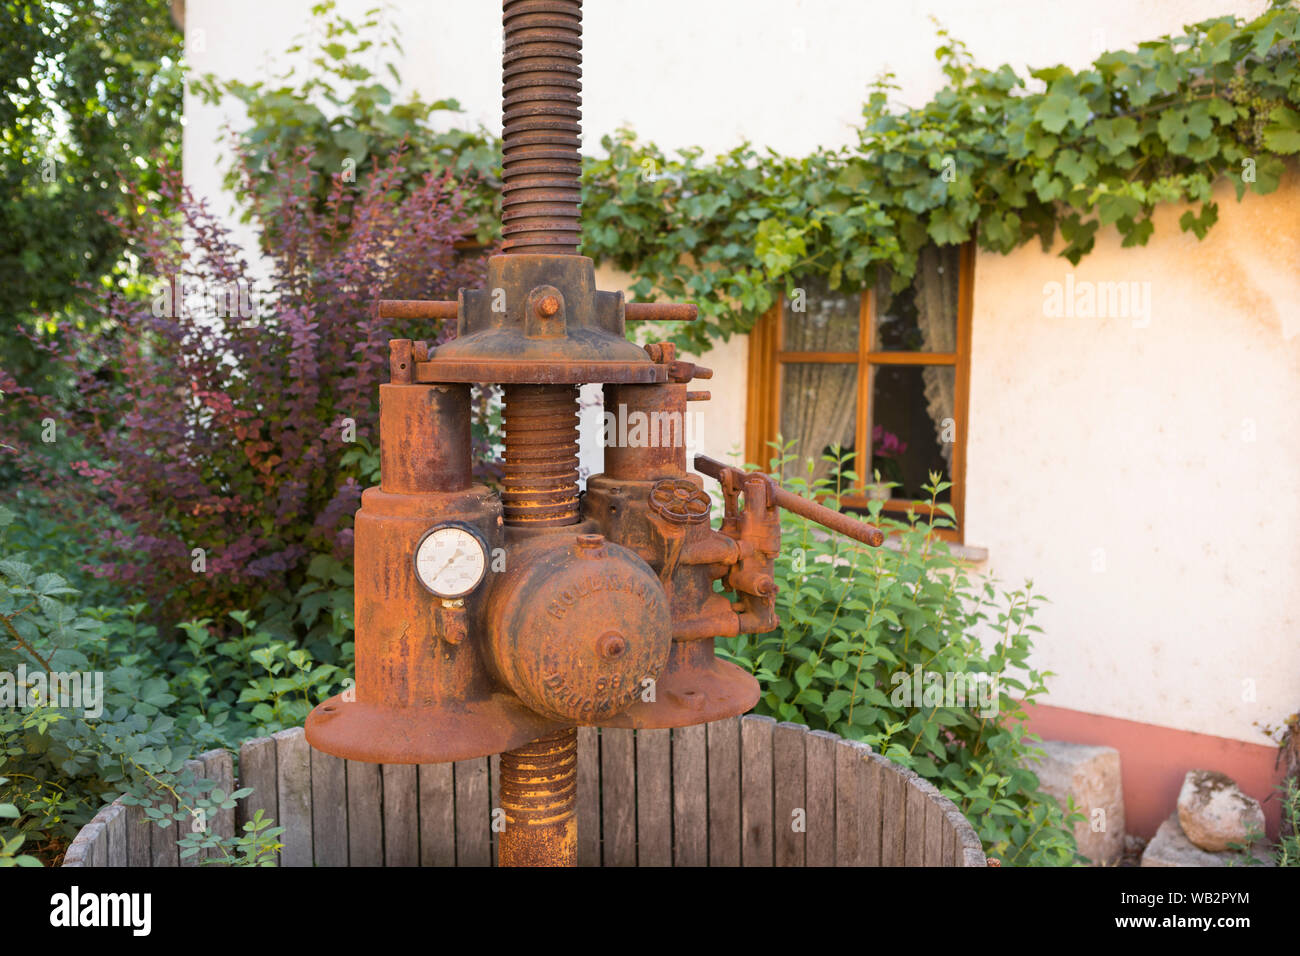 Vintage wine press used as decoration at front garden in a typical wine area, Rhine Valley, Nierstein, Germany Stock Photo